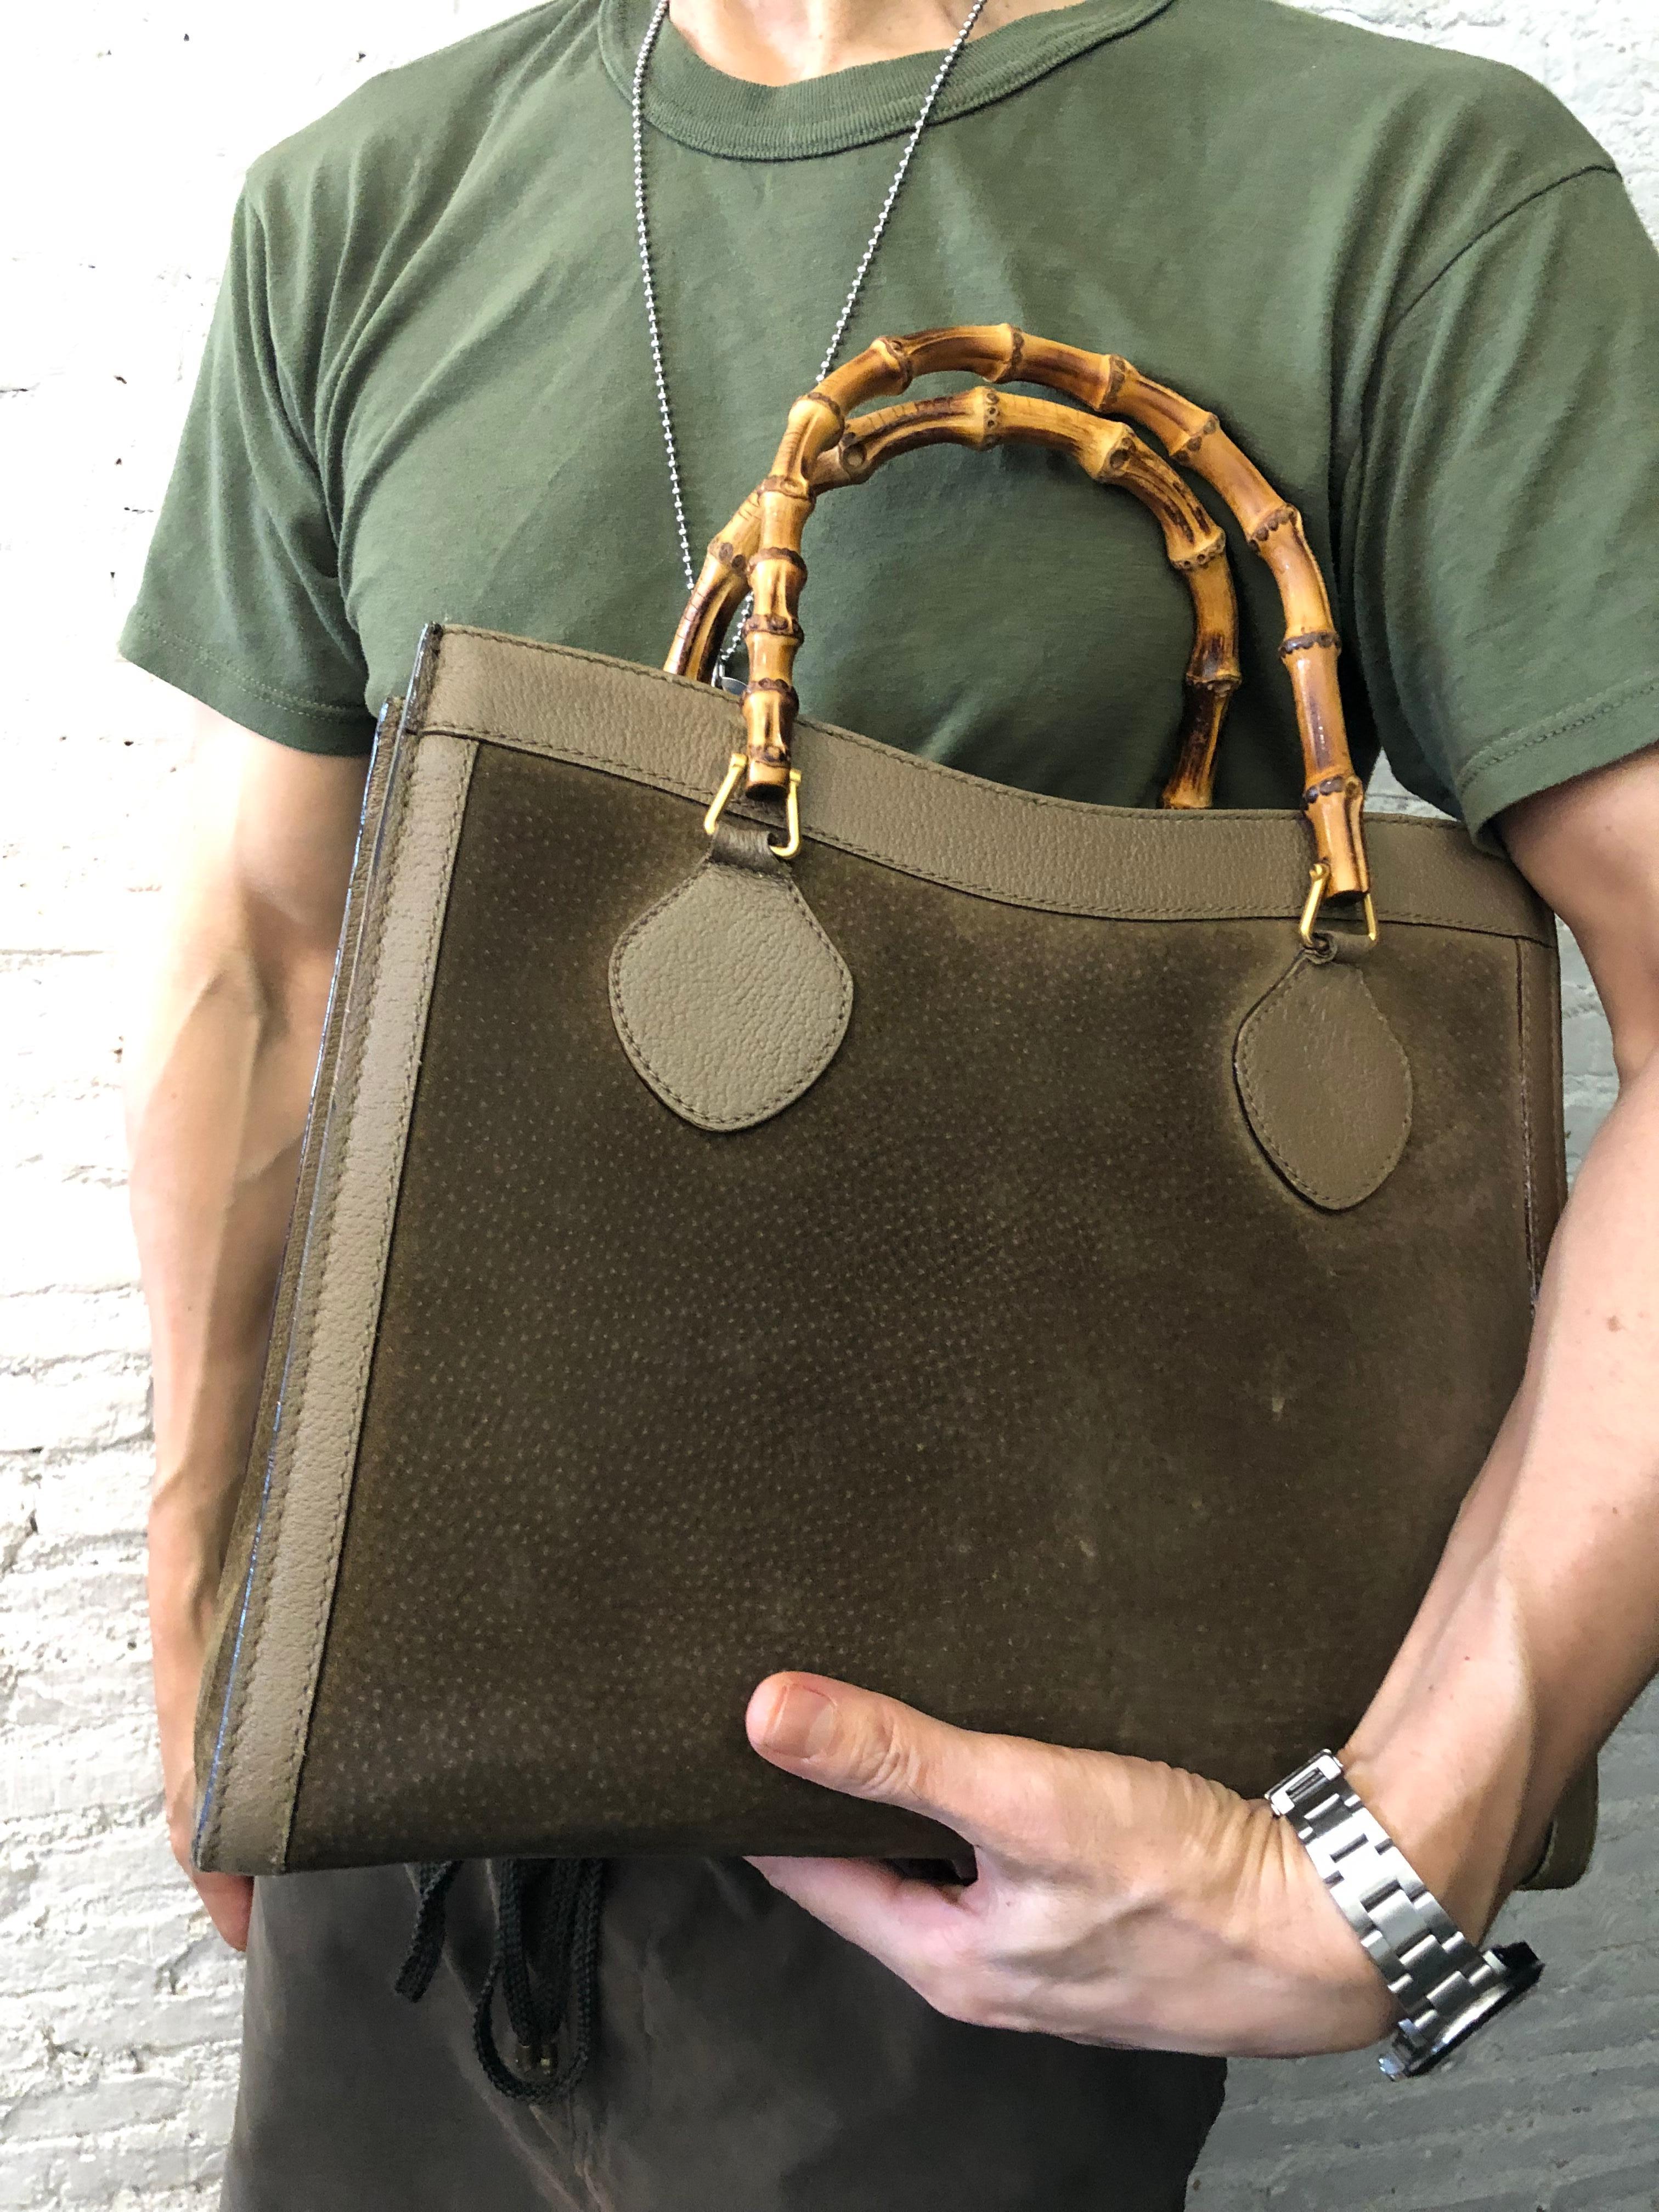 This vintage GUCCI Diana bamboo tote is crafted of pigskin’s leather and nubuck leather in army green and matt gold toned hardware. Top magnetic snap closure opens to a new interior in beige. It features two main compartments with one zippered